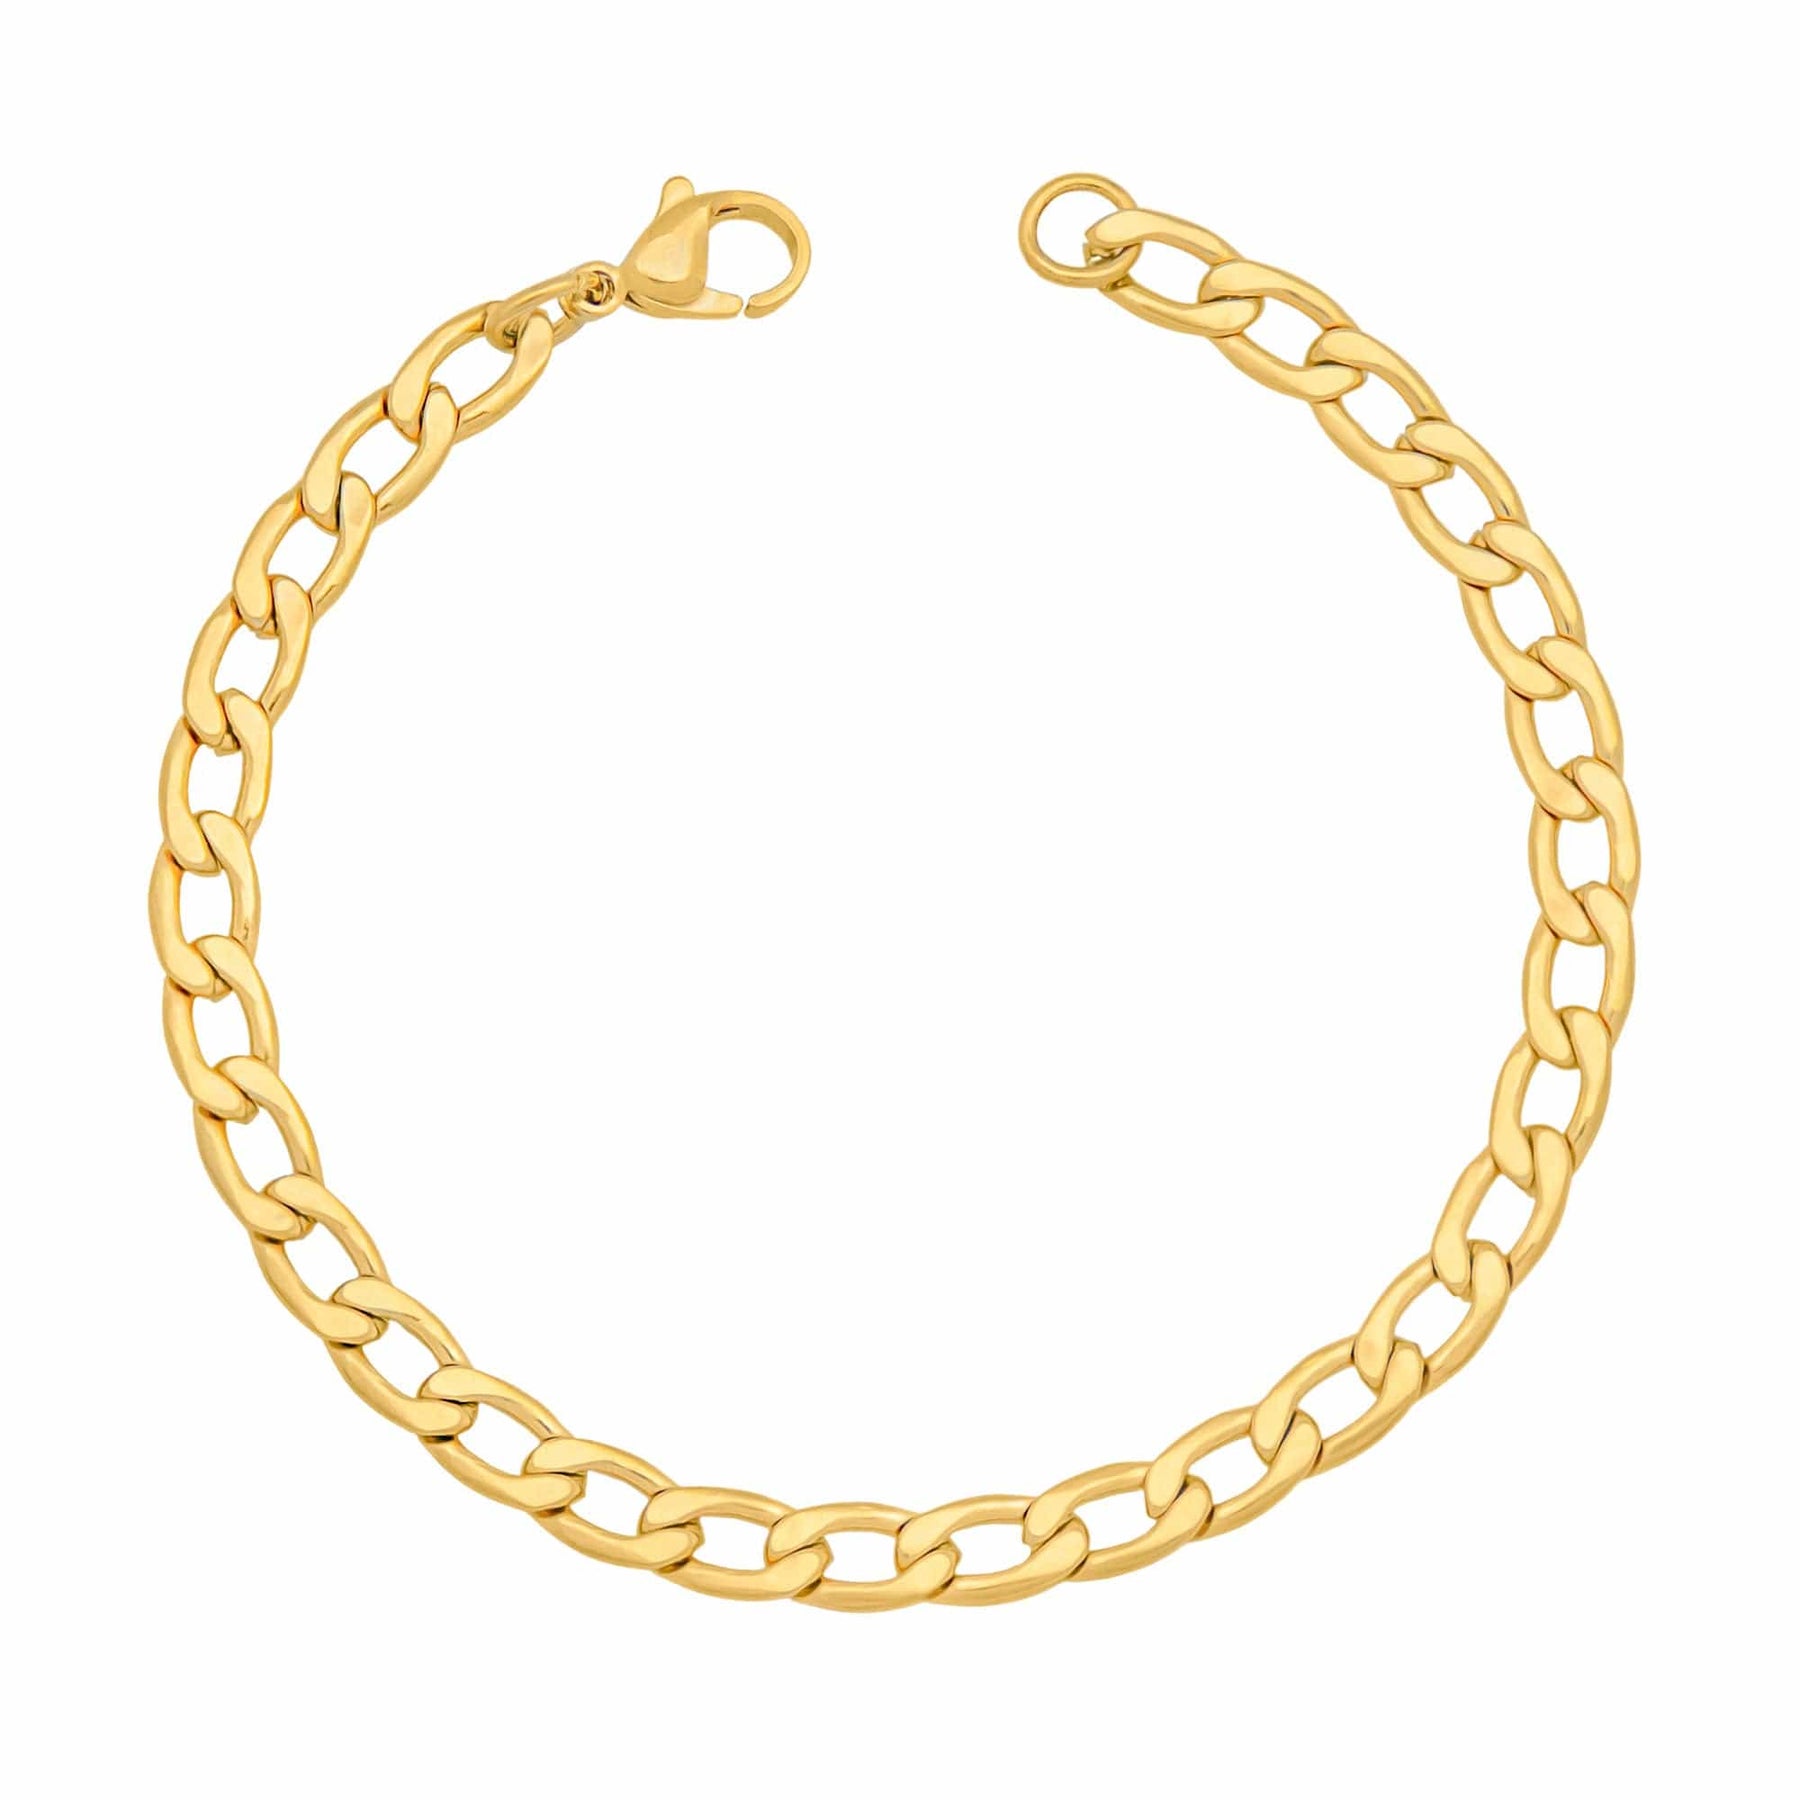 BohoMoon Stainless Steel Alessia Bracelet Gold / Small